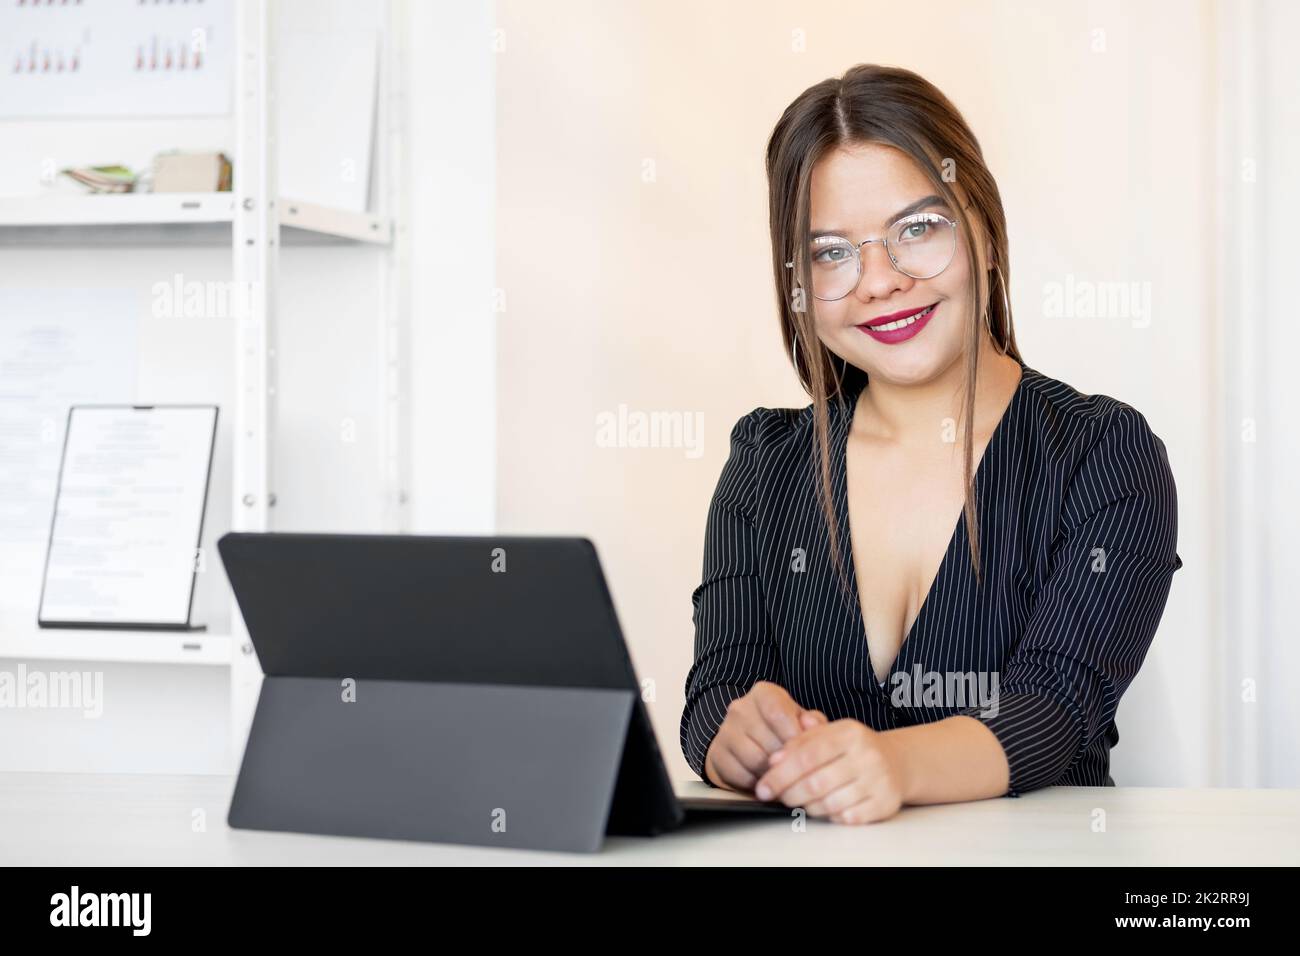 Successful business woman. Female leadership. Professional career. Confident ambitious smart lady in glasses working from home office with laptop. Stock Photo